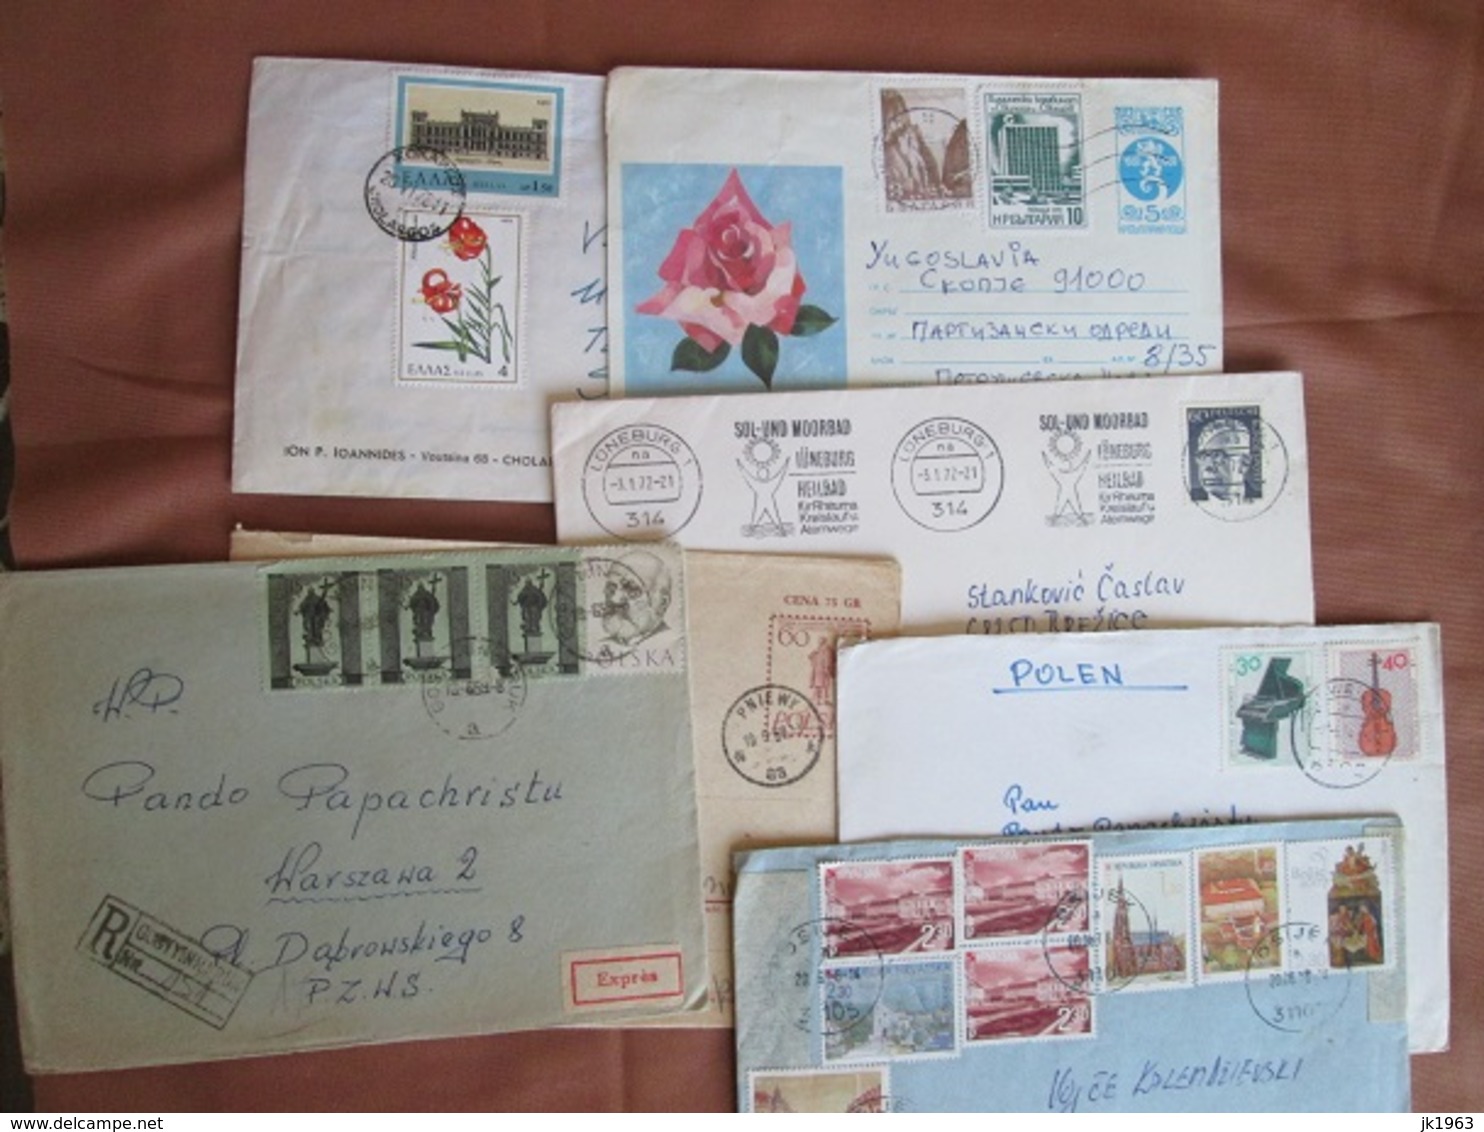 BIG LOT, 2 Kg,  ABOUT 1500 WORLDWIDE STAMPS, DOCUMENTS WITH  TAX STAMPS, 300+ COVERS POSTCARDS , AND OTHER